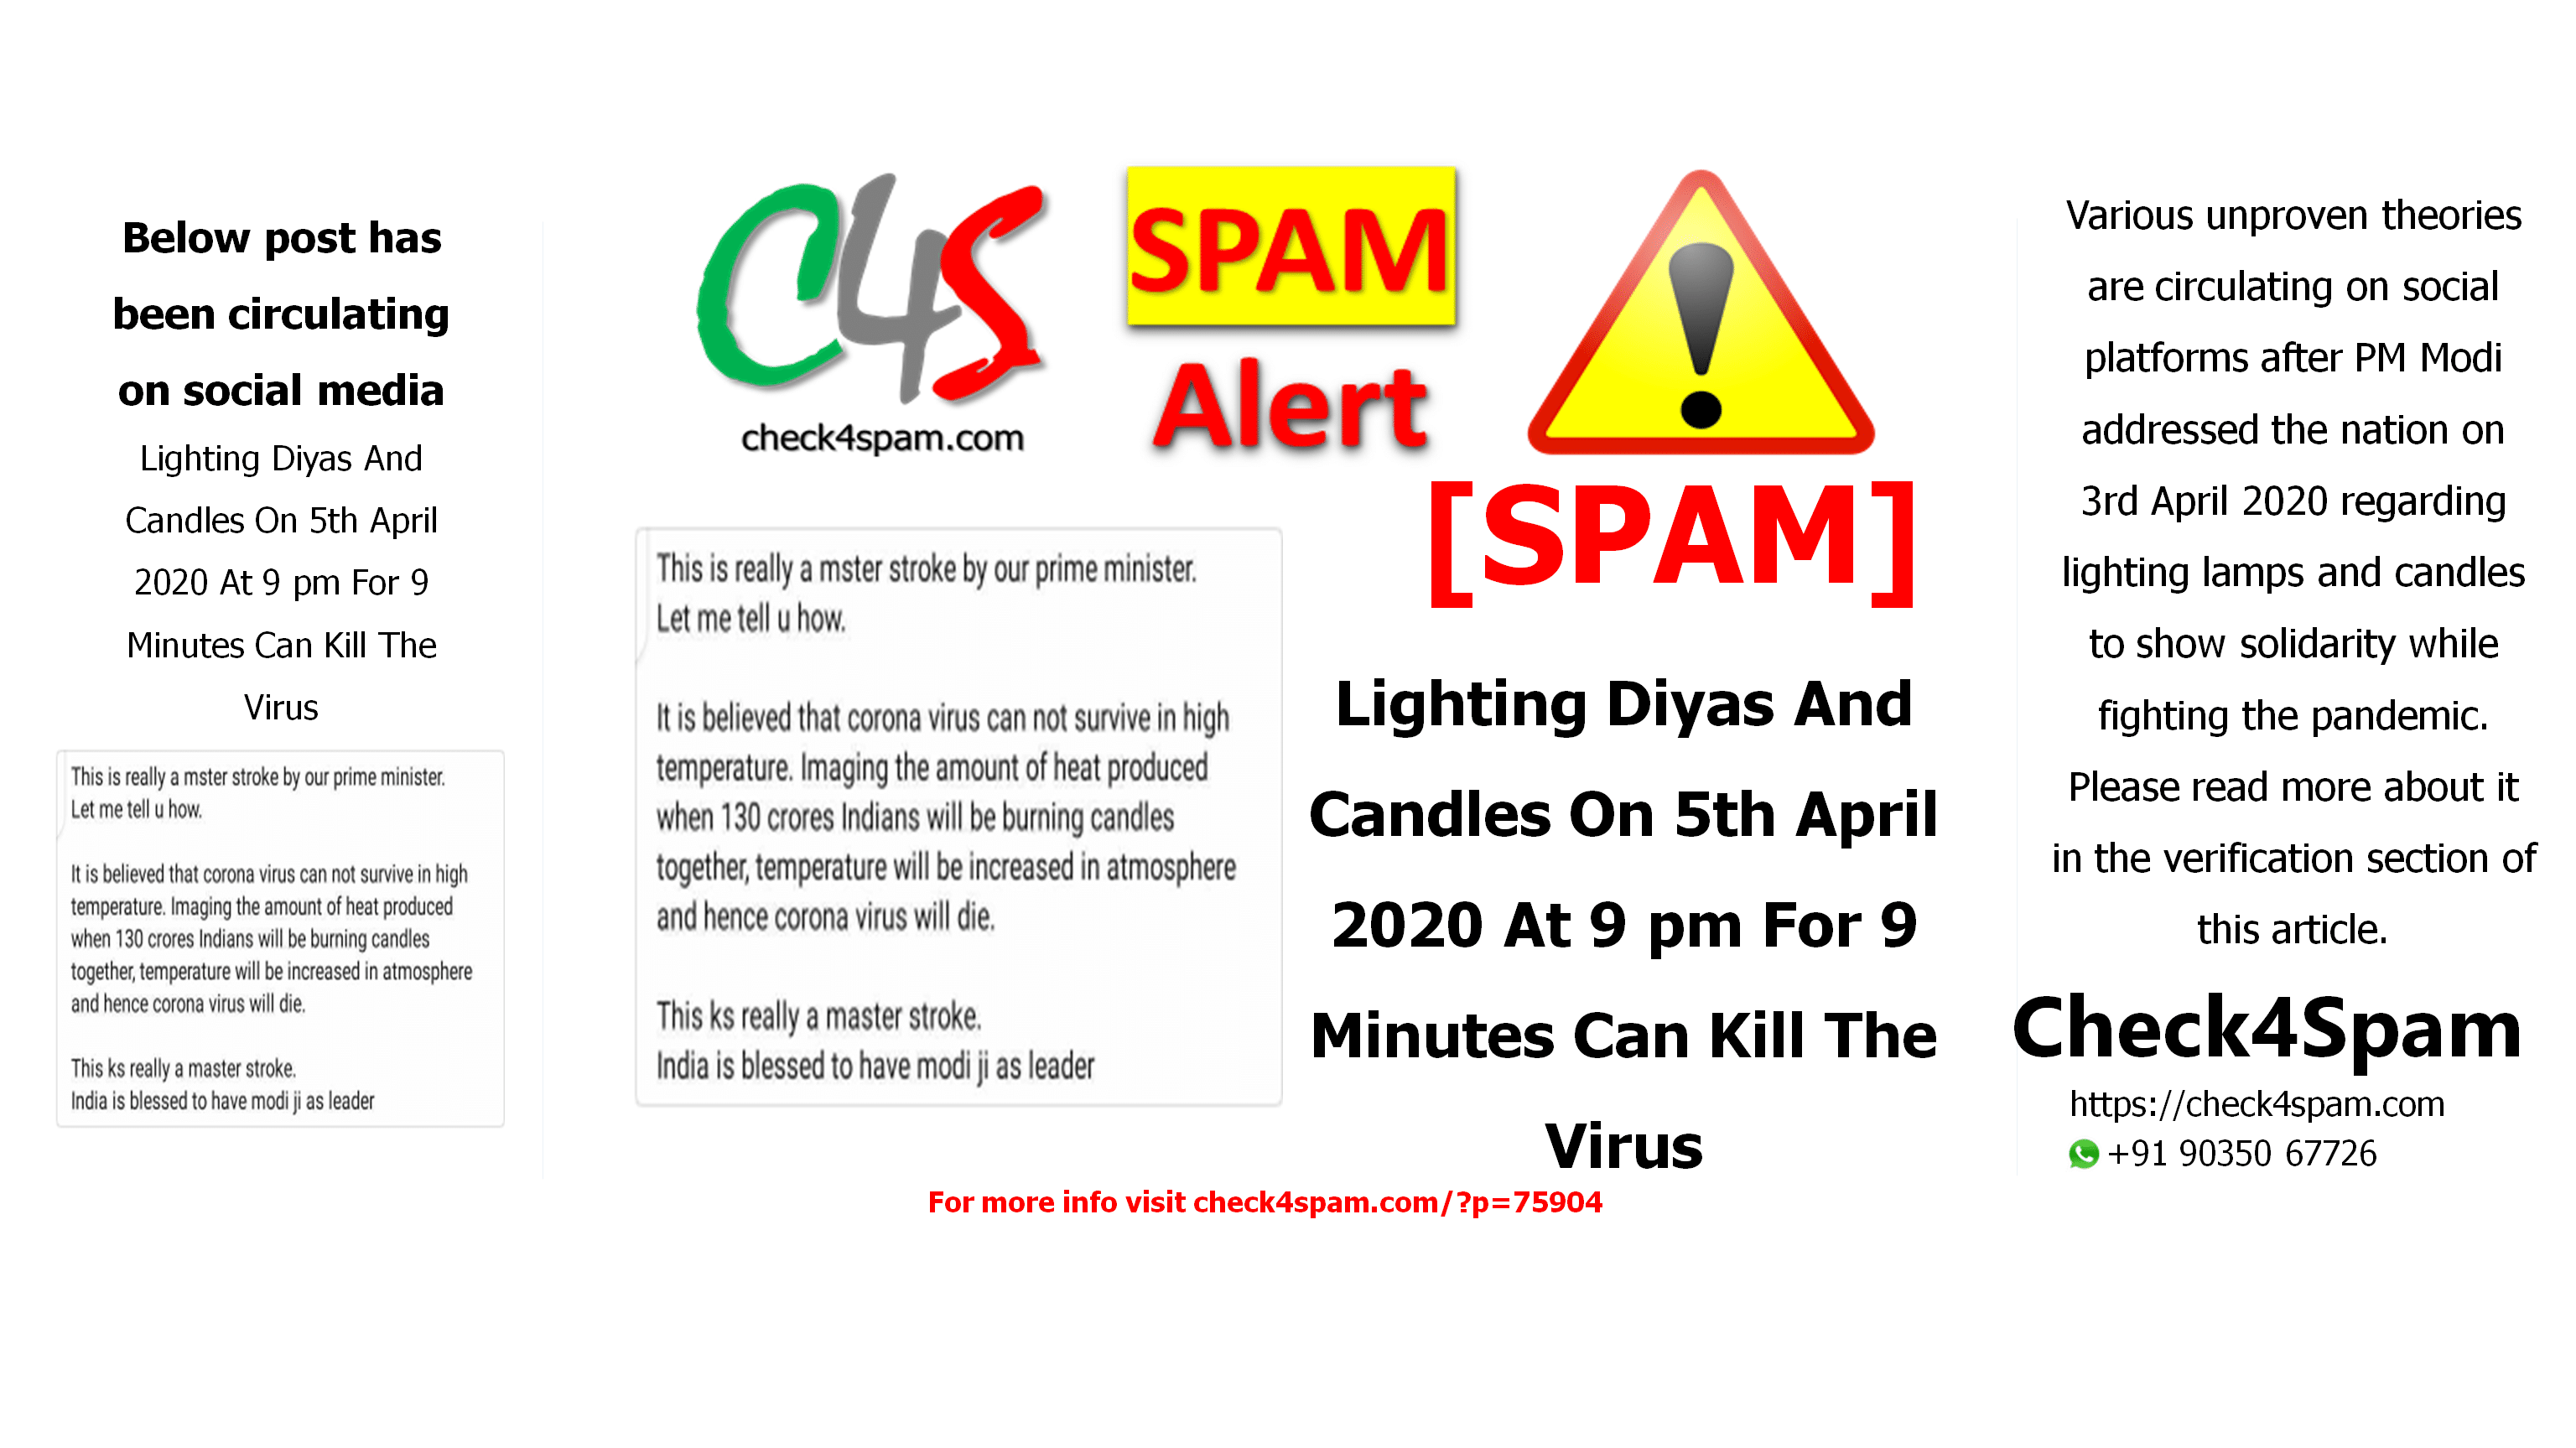 Lighting Diyas And Candles On 5th April 2020 At 9 pm For 9 Minutes Can Kill The Virus